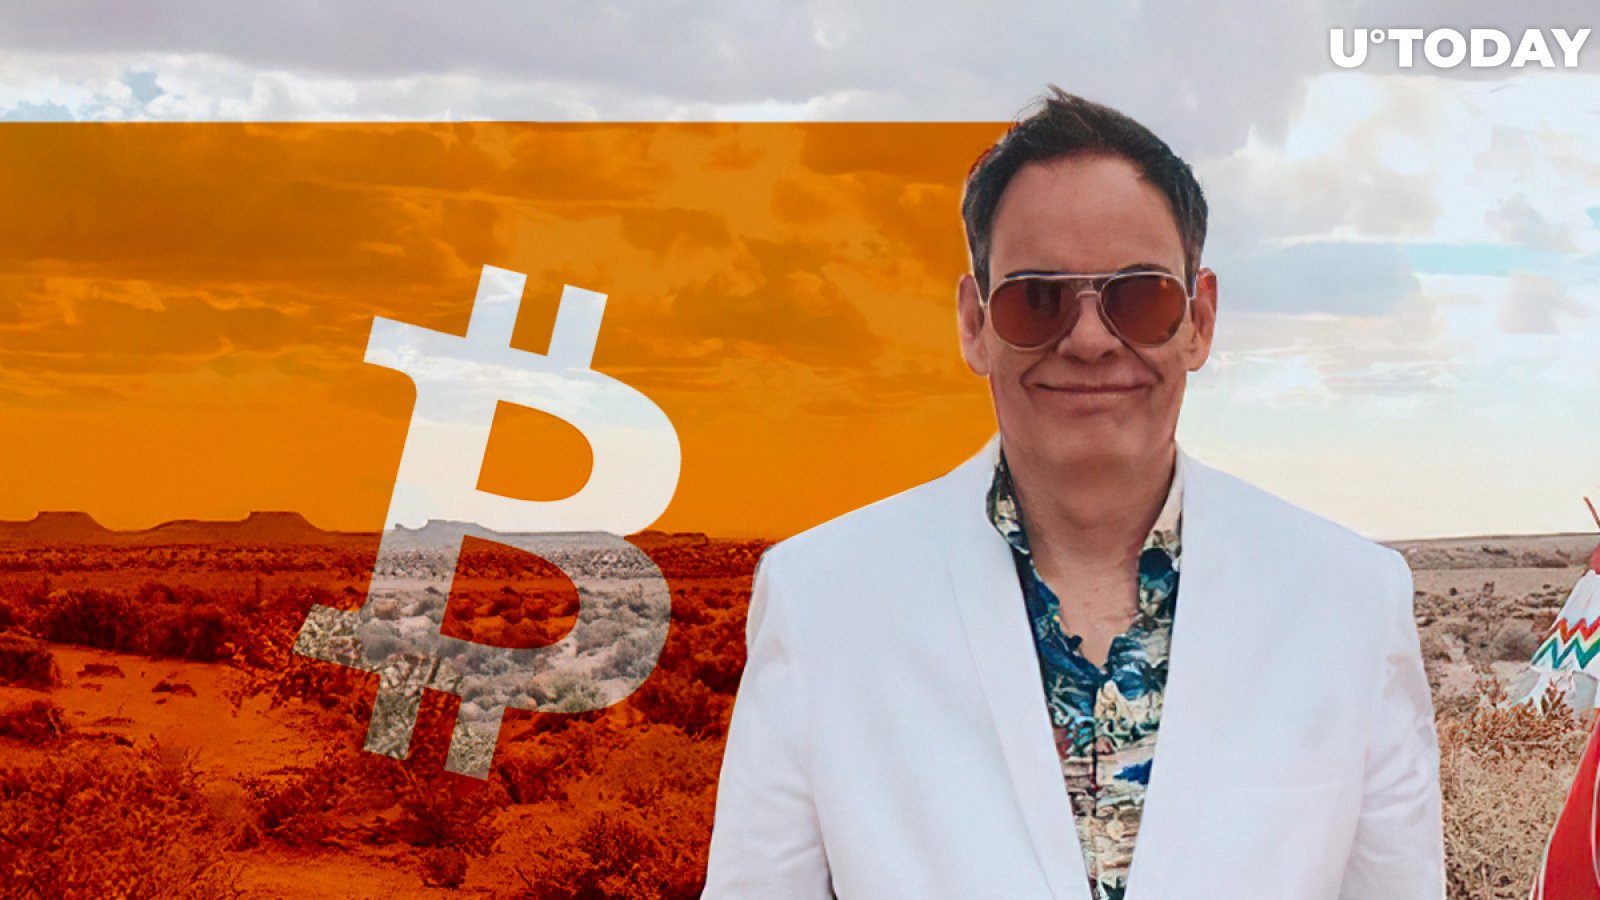 Bitcoin (BTC) Price 'Stock-to-Flow' Model Called 'Valid and Vital Analysis' by Max Keiser